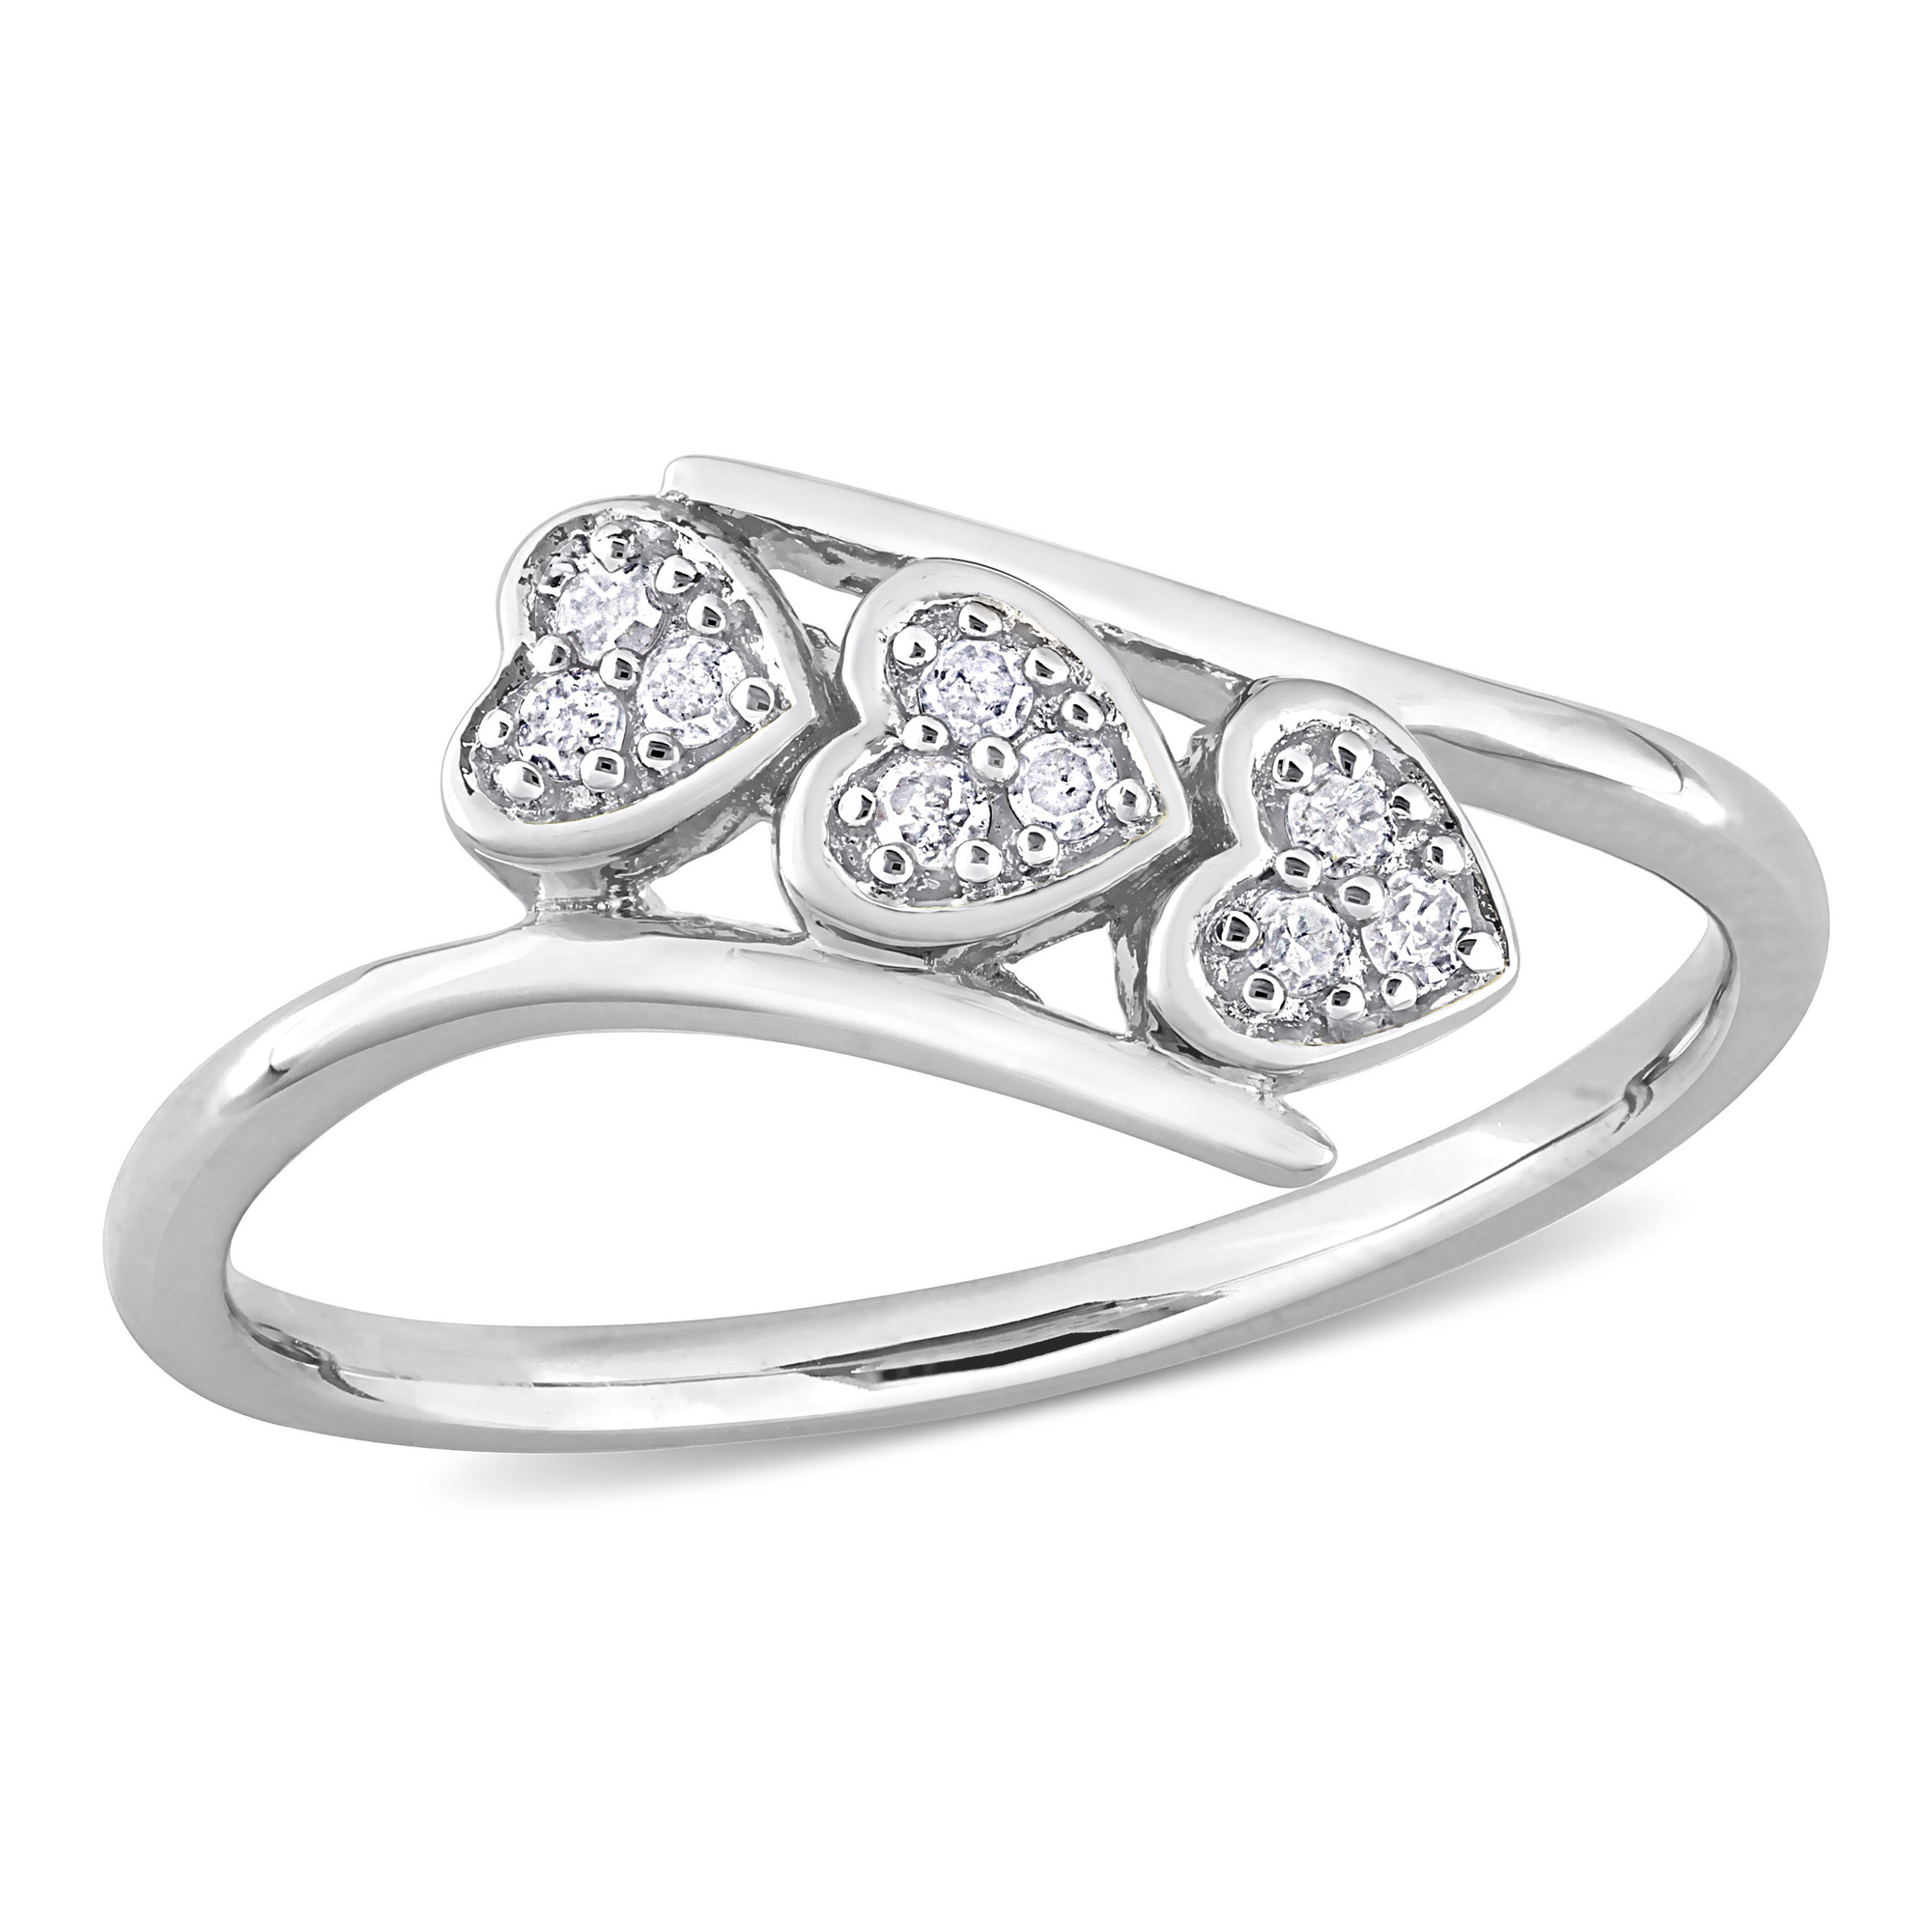 1/10ctw Diamond Triple Heart Sterling Silver Bypass Promise Ring - Size 5 -  REEDS, RDJ005621-0500